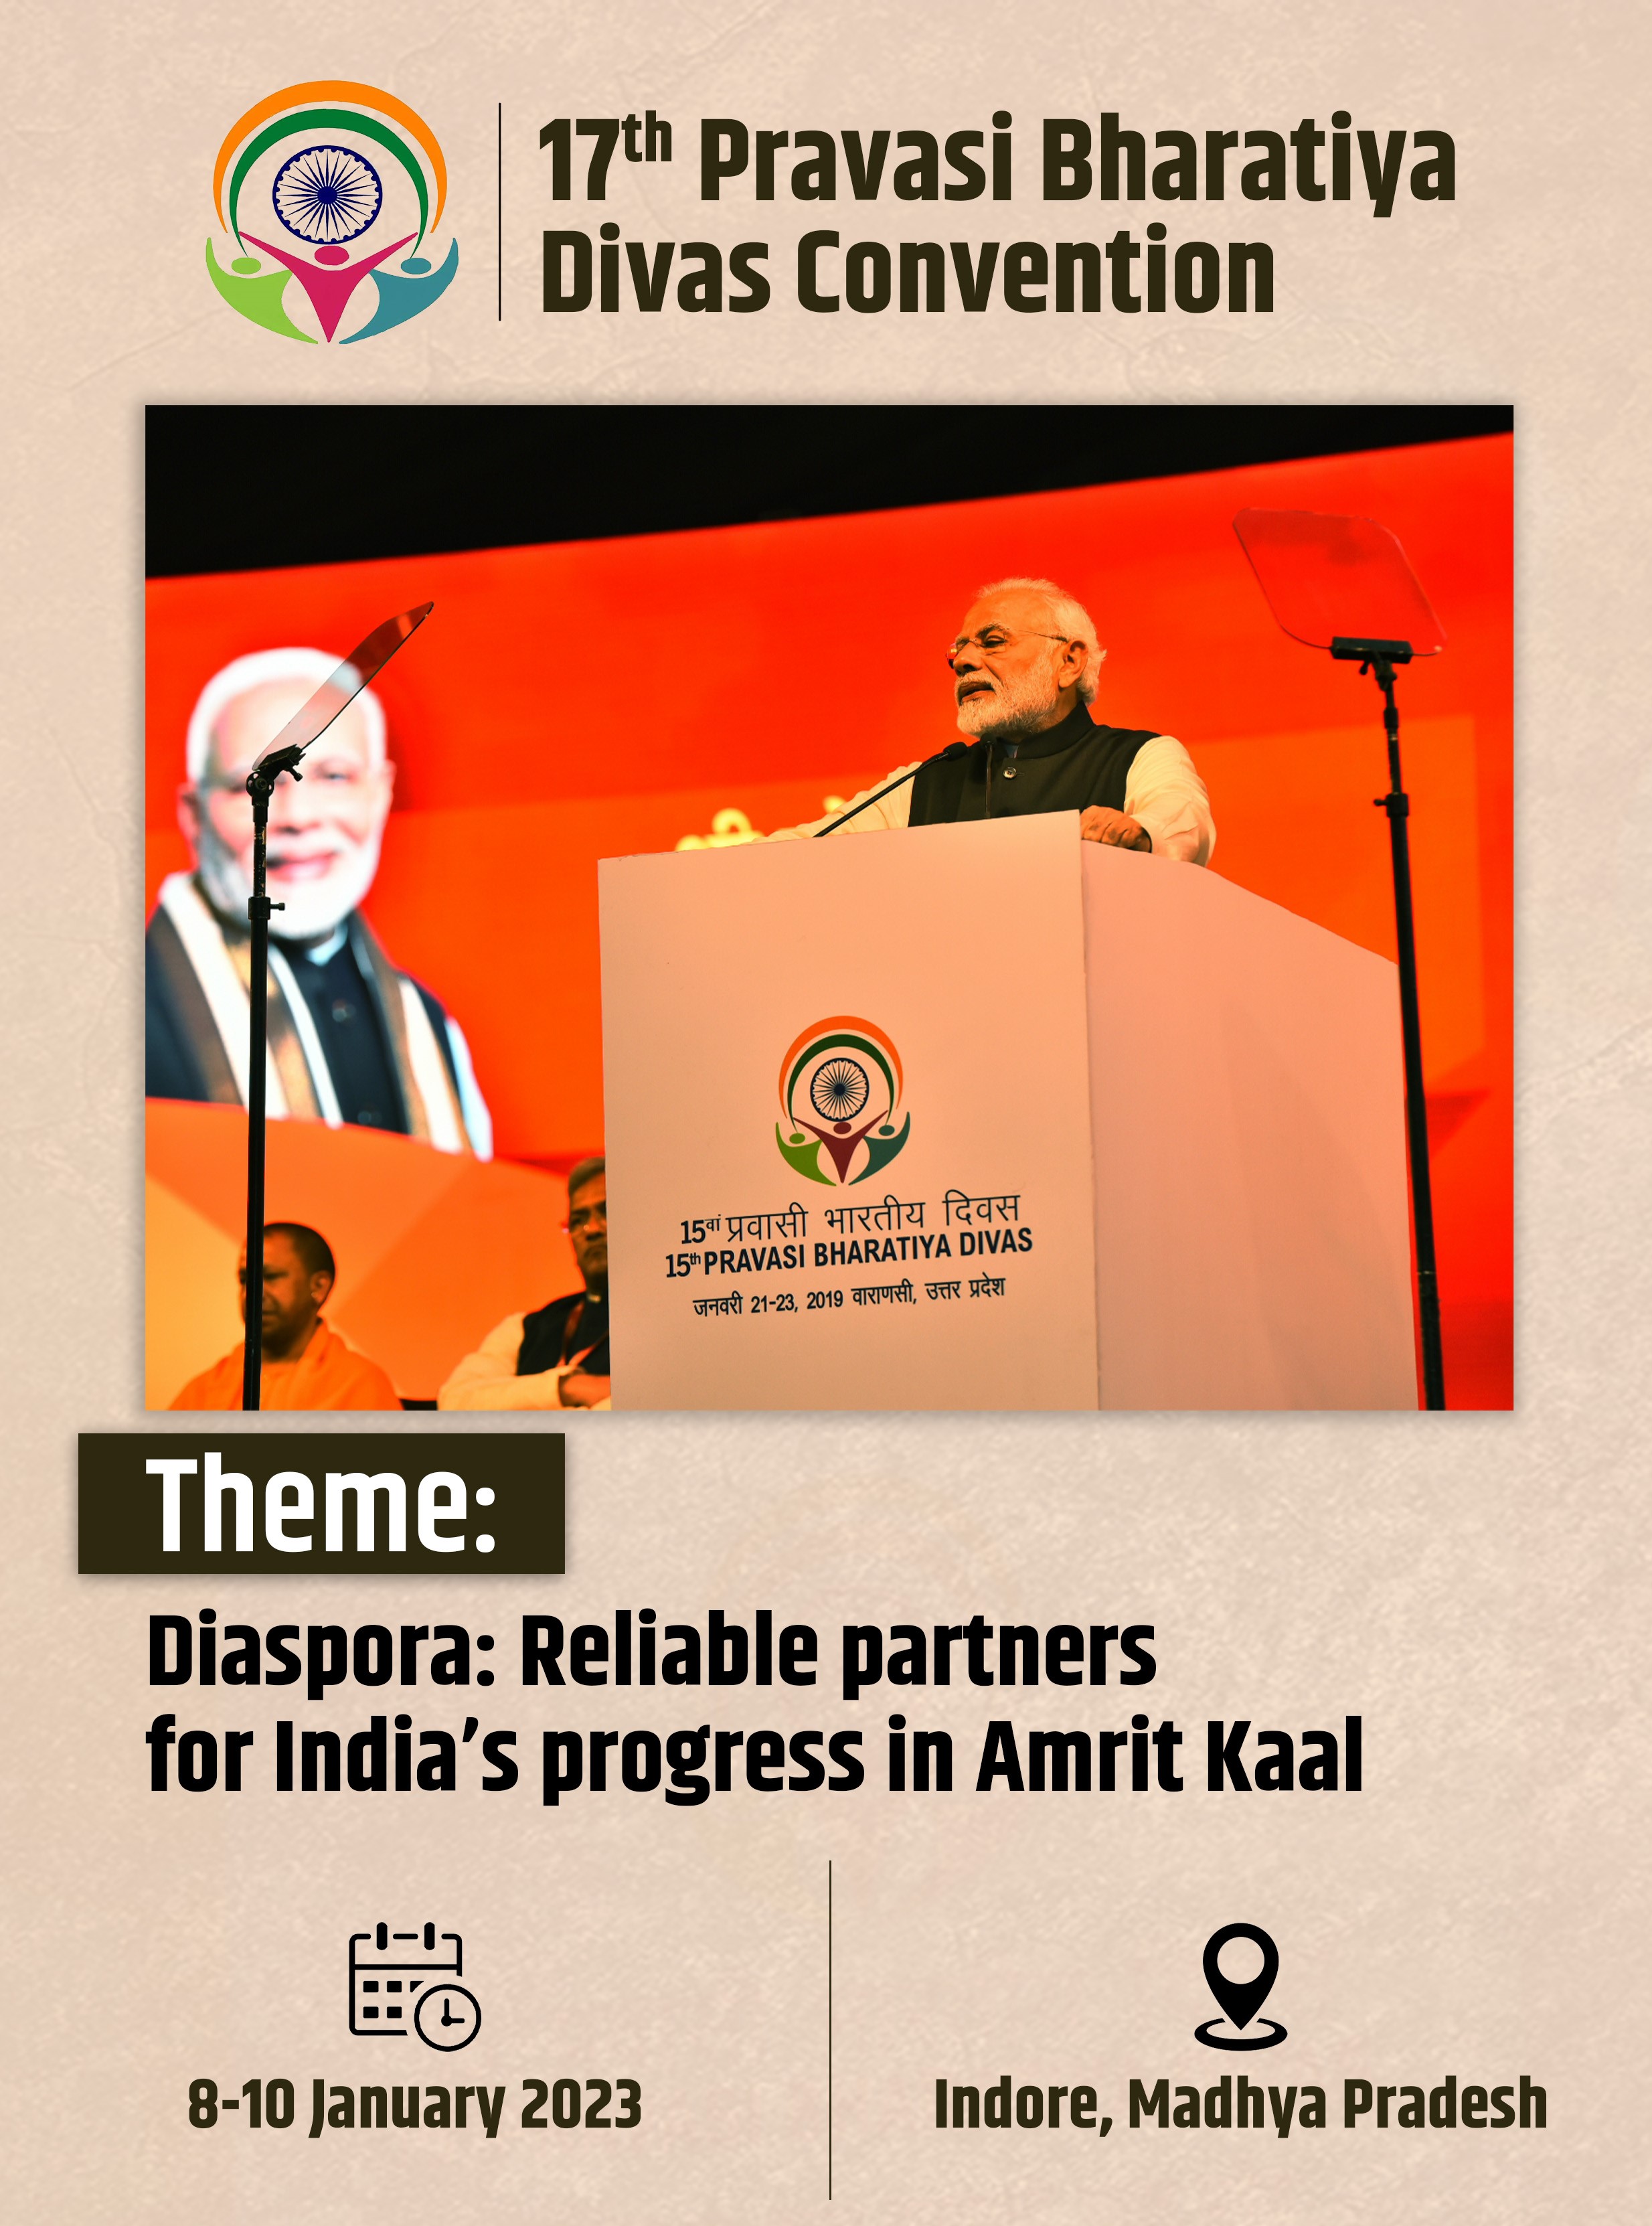 Live streaming of PBD 2023 Convention